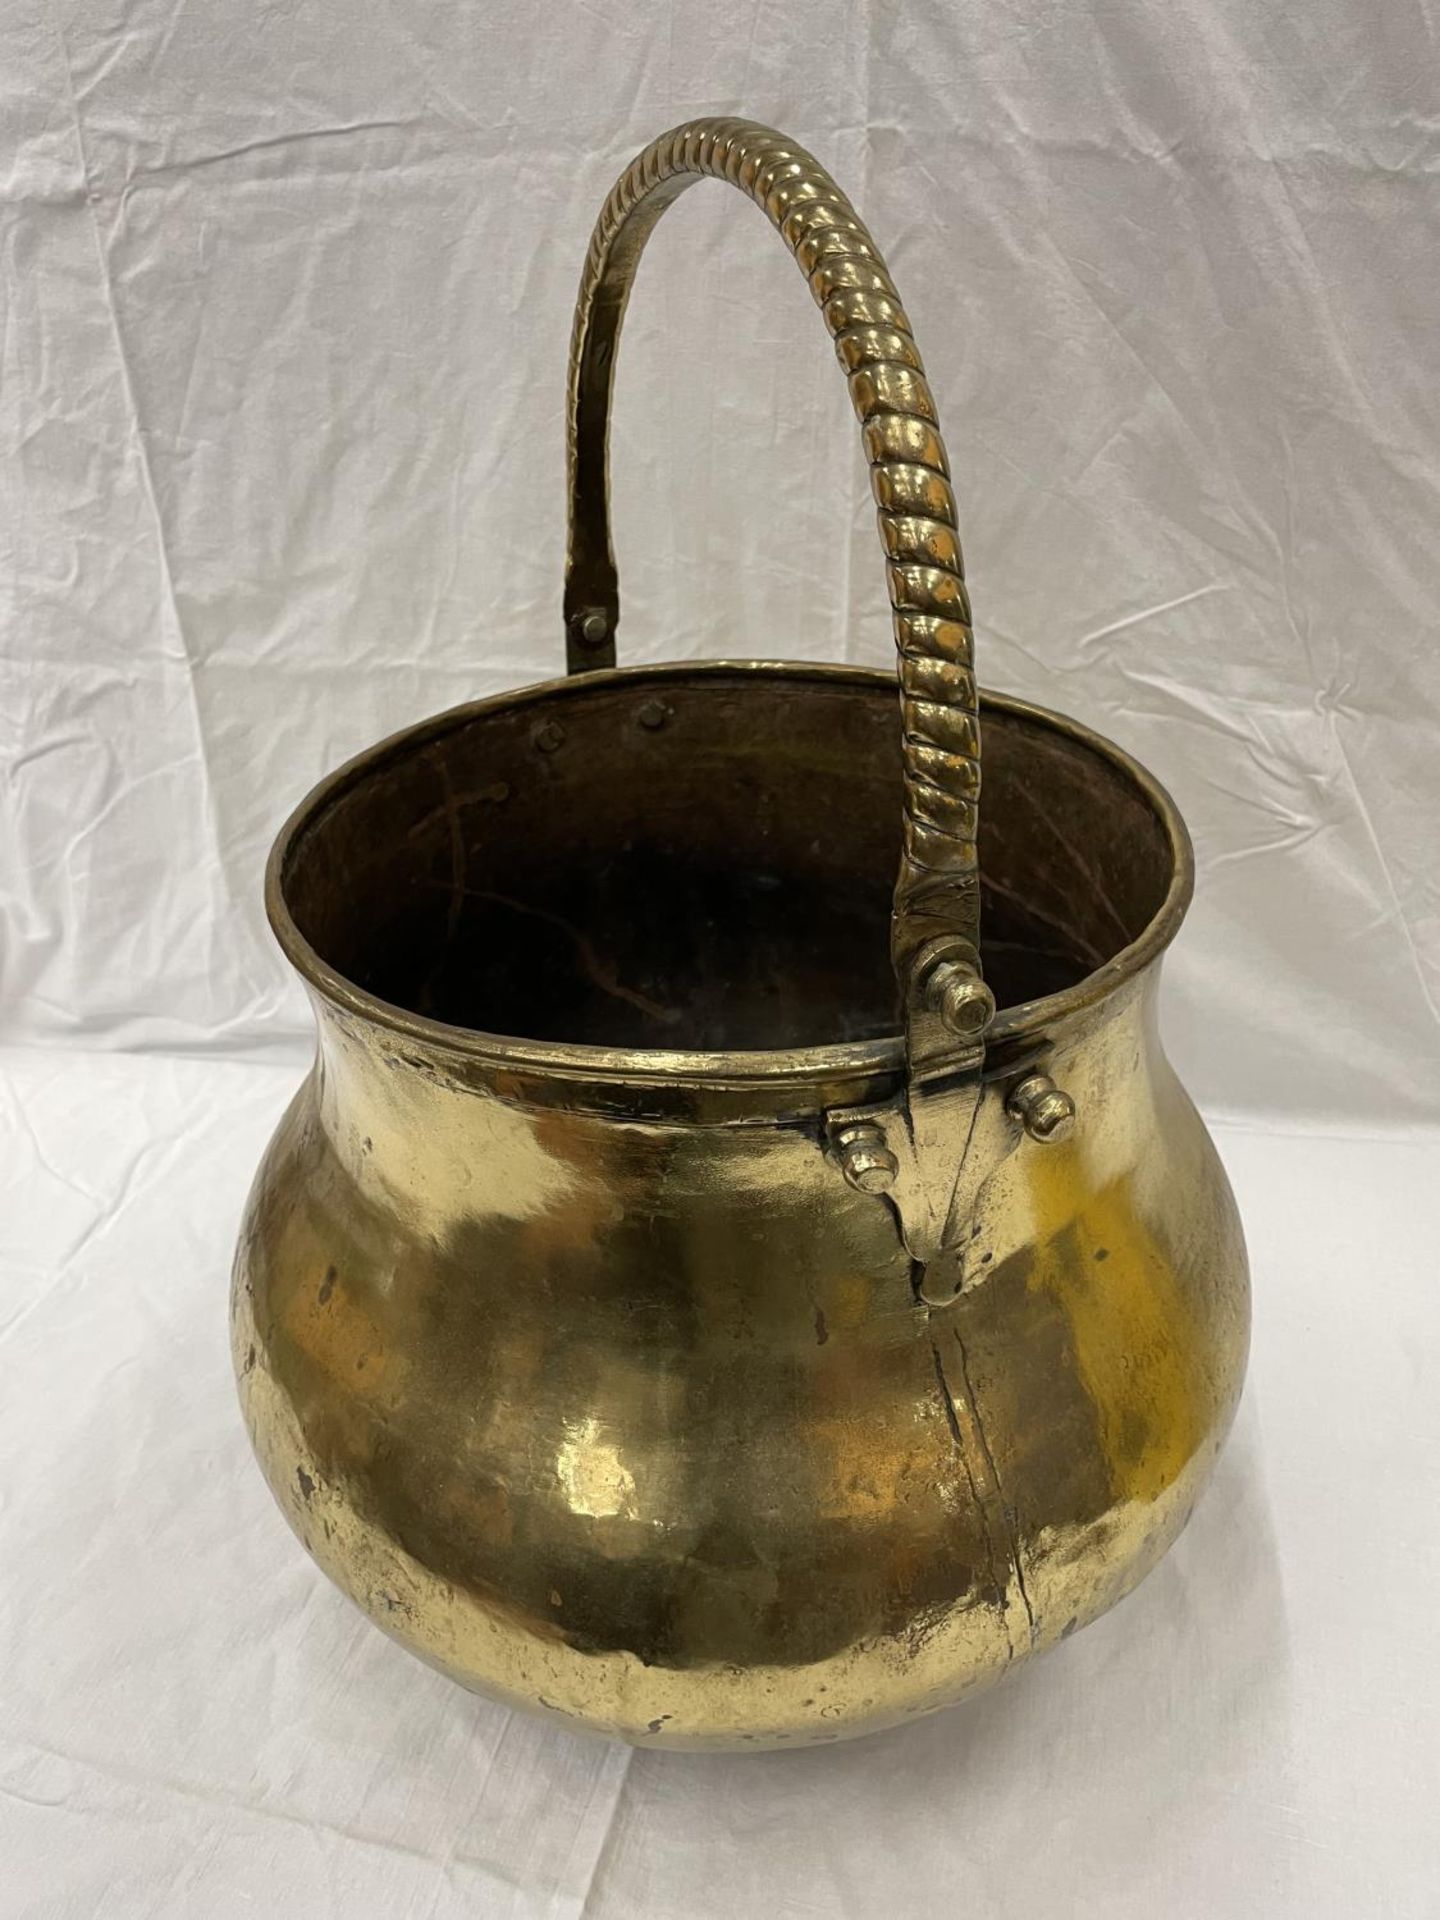 A VERY LARGE BRASS CAULDRON WITH THREE BALL FEET AND A ROPE DESIGN, HANDLE HEIGHT 43CM - Image 2 of 6